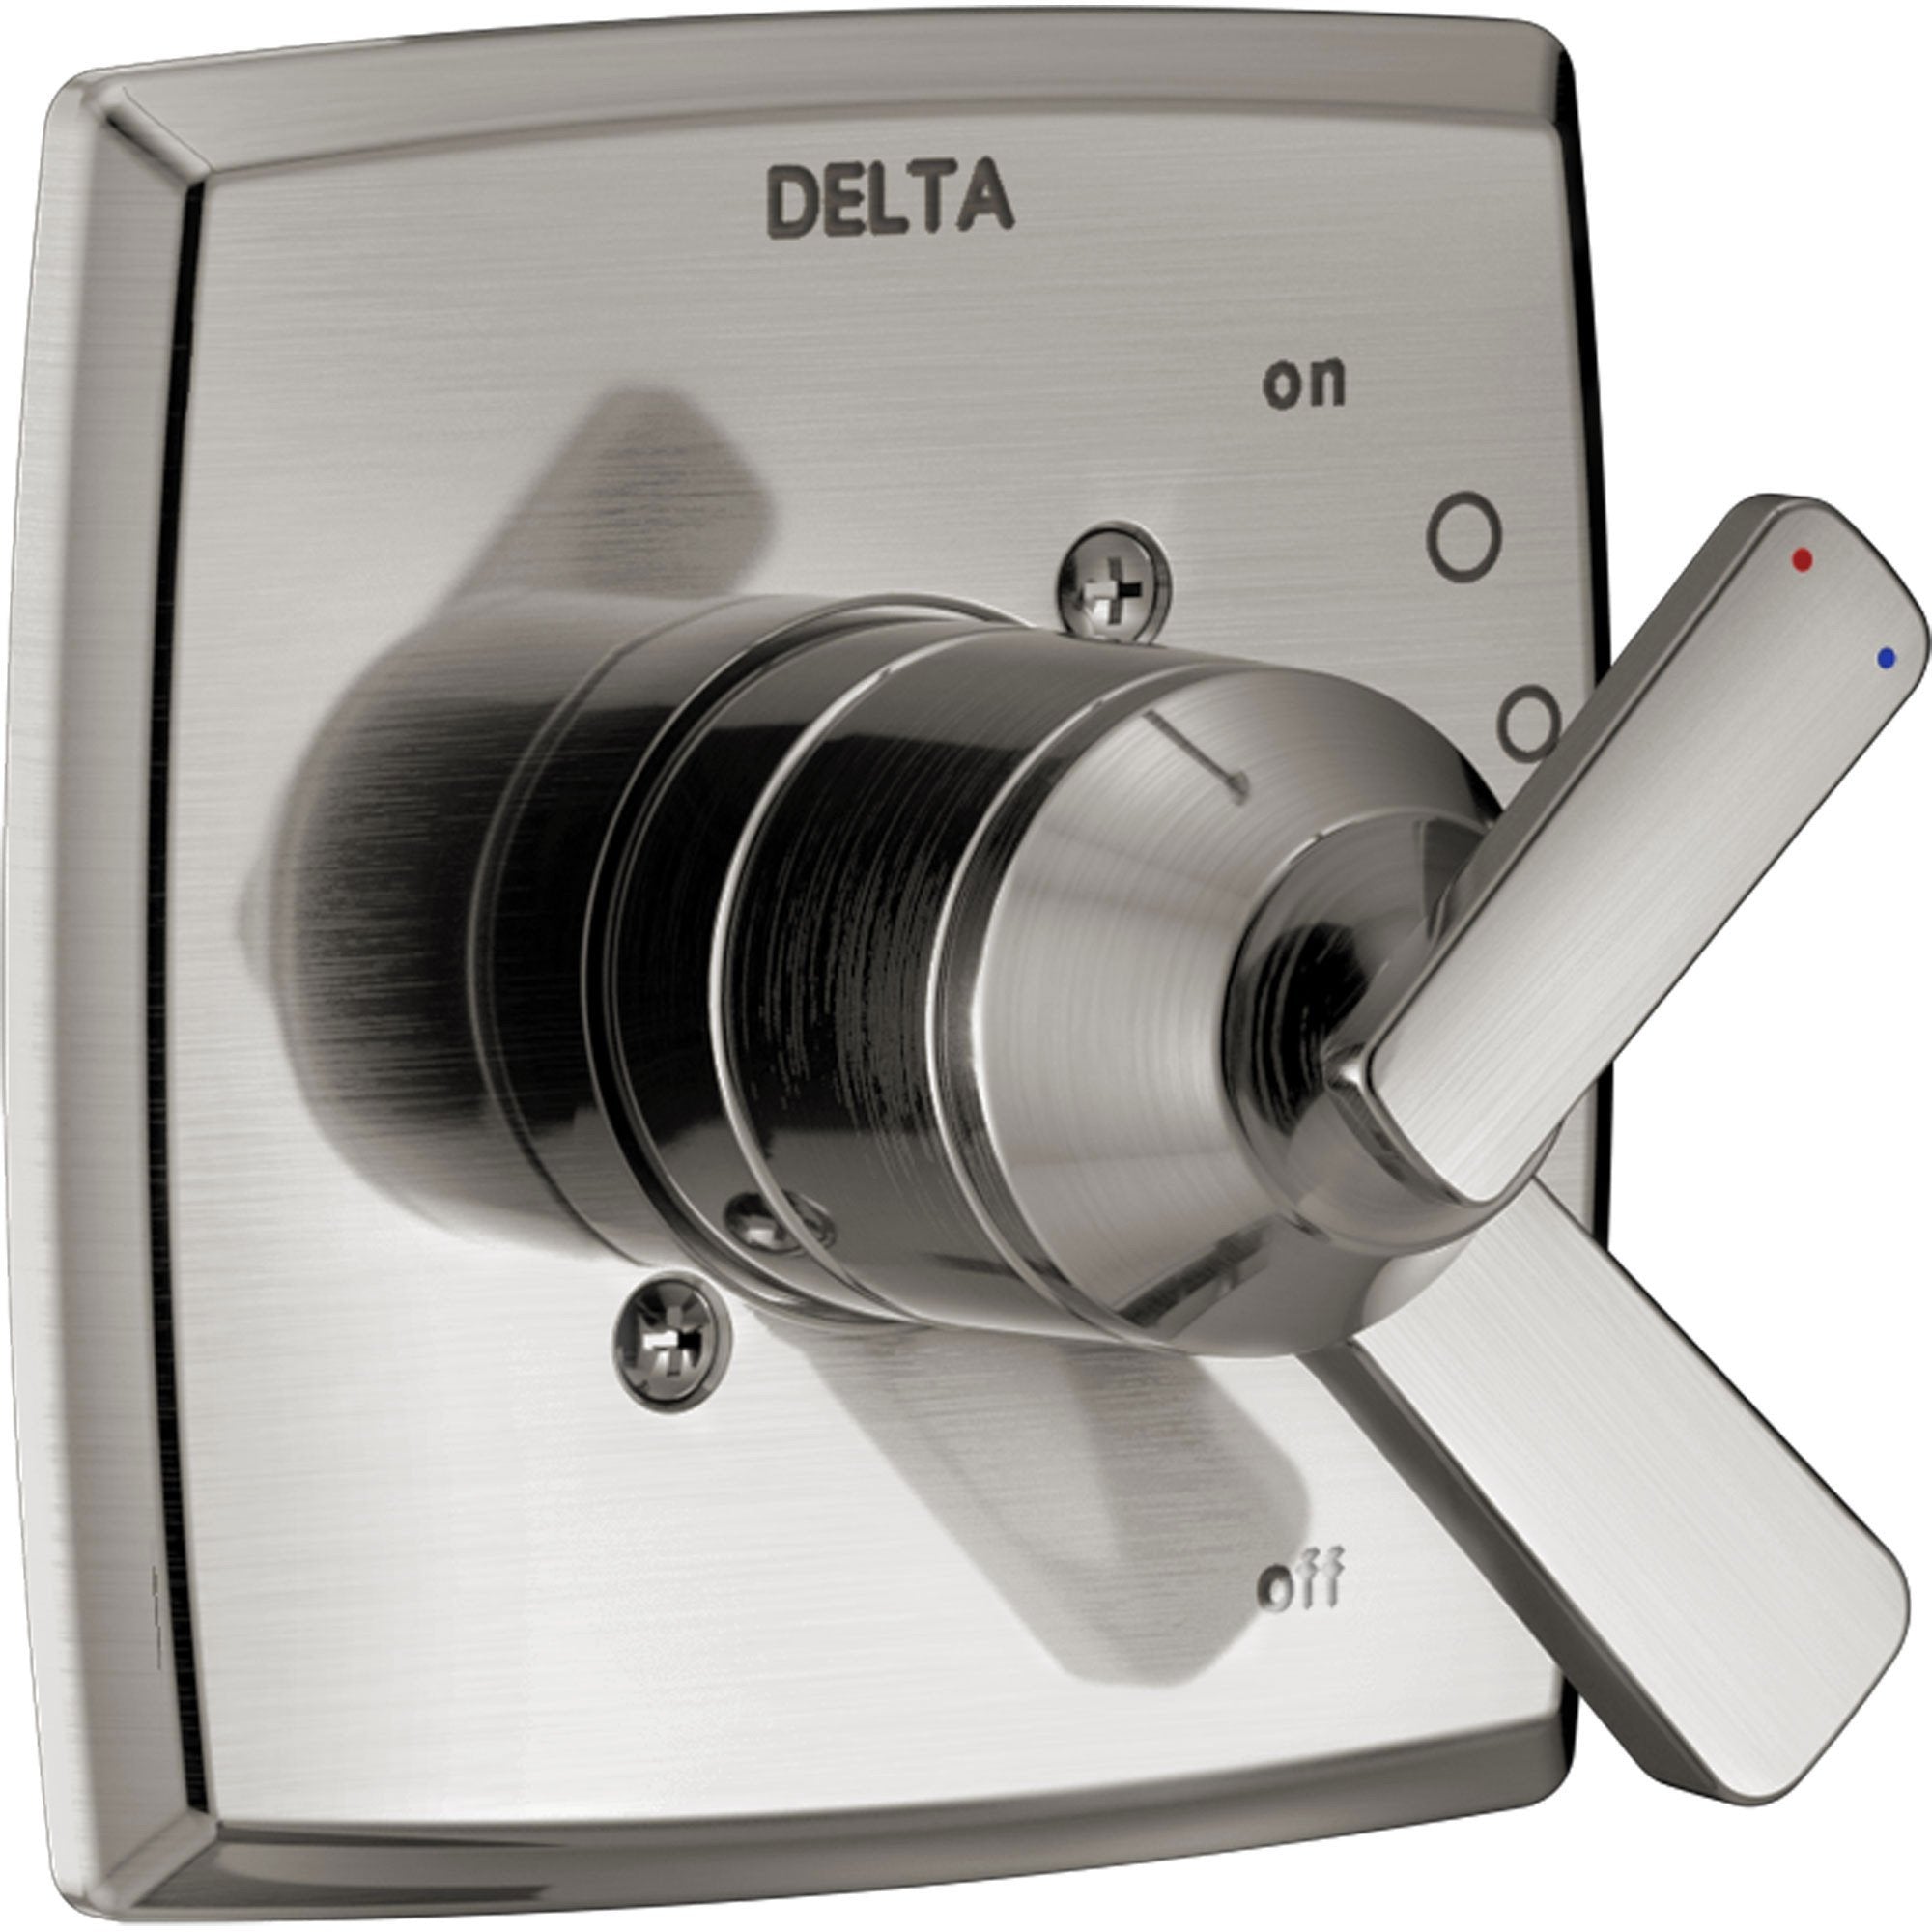 Delta Ashlyn Modern Stainless Steel Finish 17 Series Dual Temperature and Pressure Shower Faucet Control INCLUDES Rough-in Valve with Stops D1153V